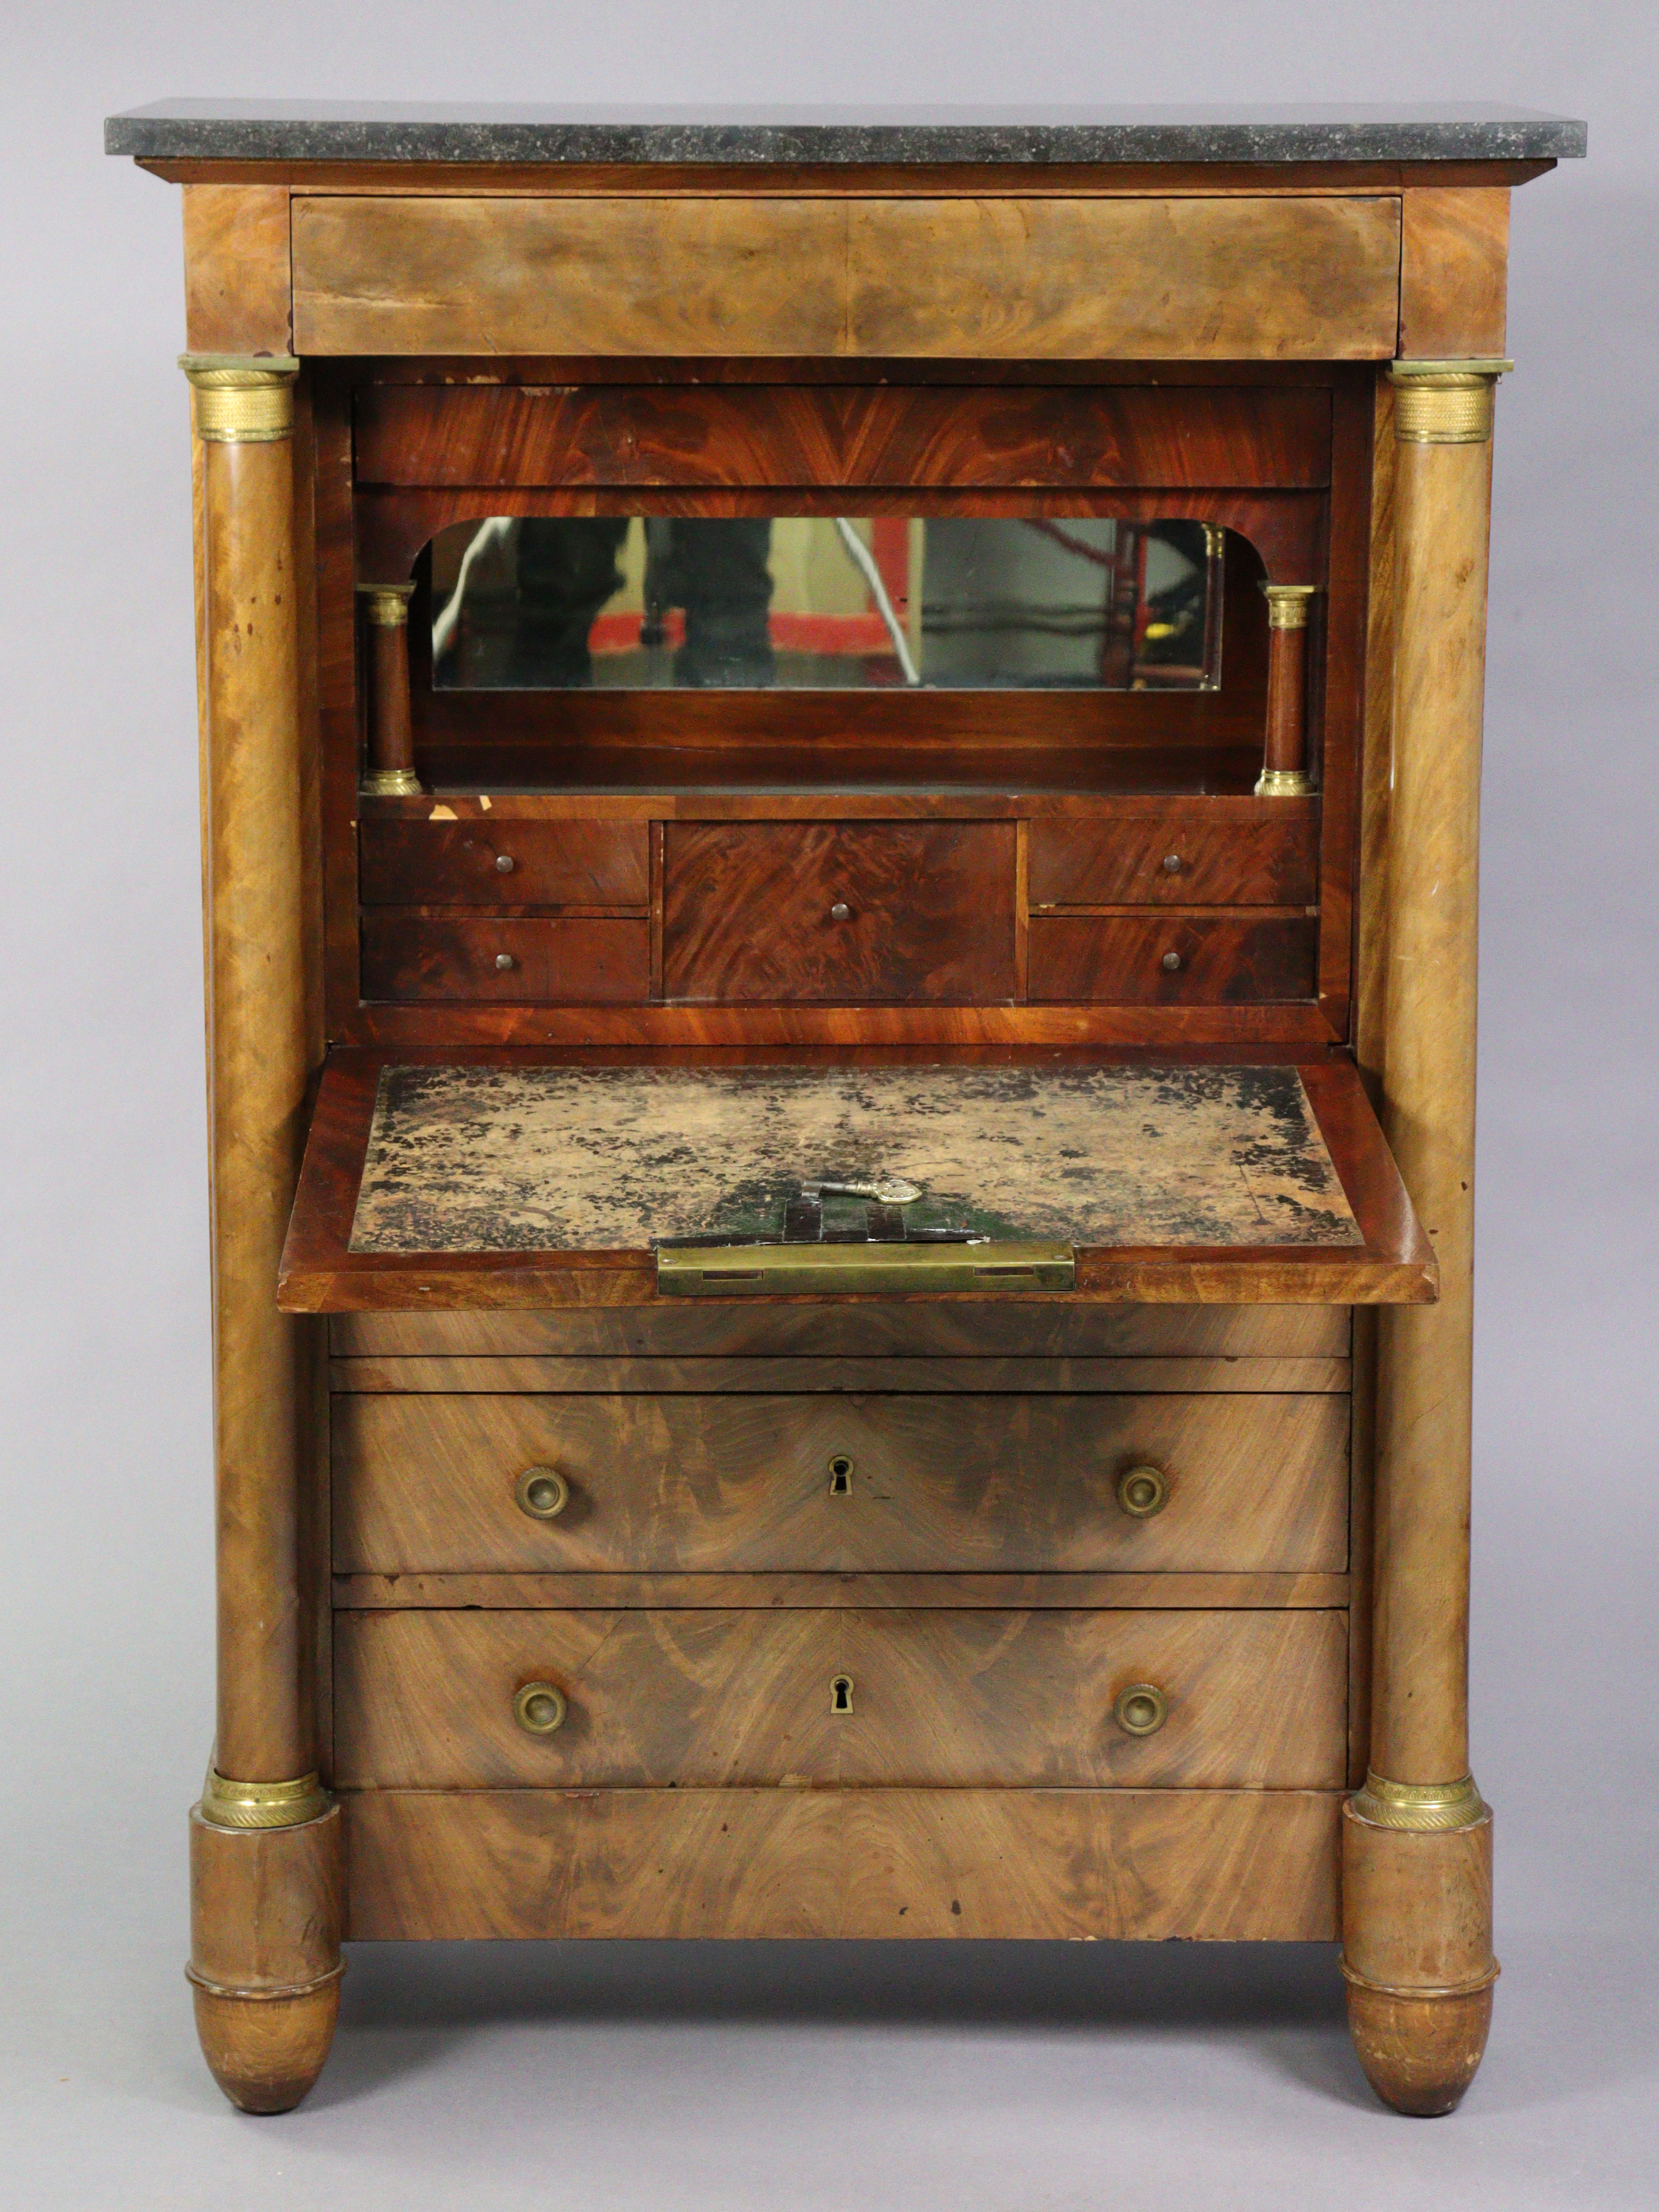 AN EARLY 19th century FRENCH WALNUT ESCRITOIRE or secretaire abatant, with brass mounted & grey - Image 2 of 12